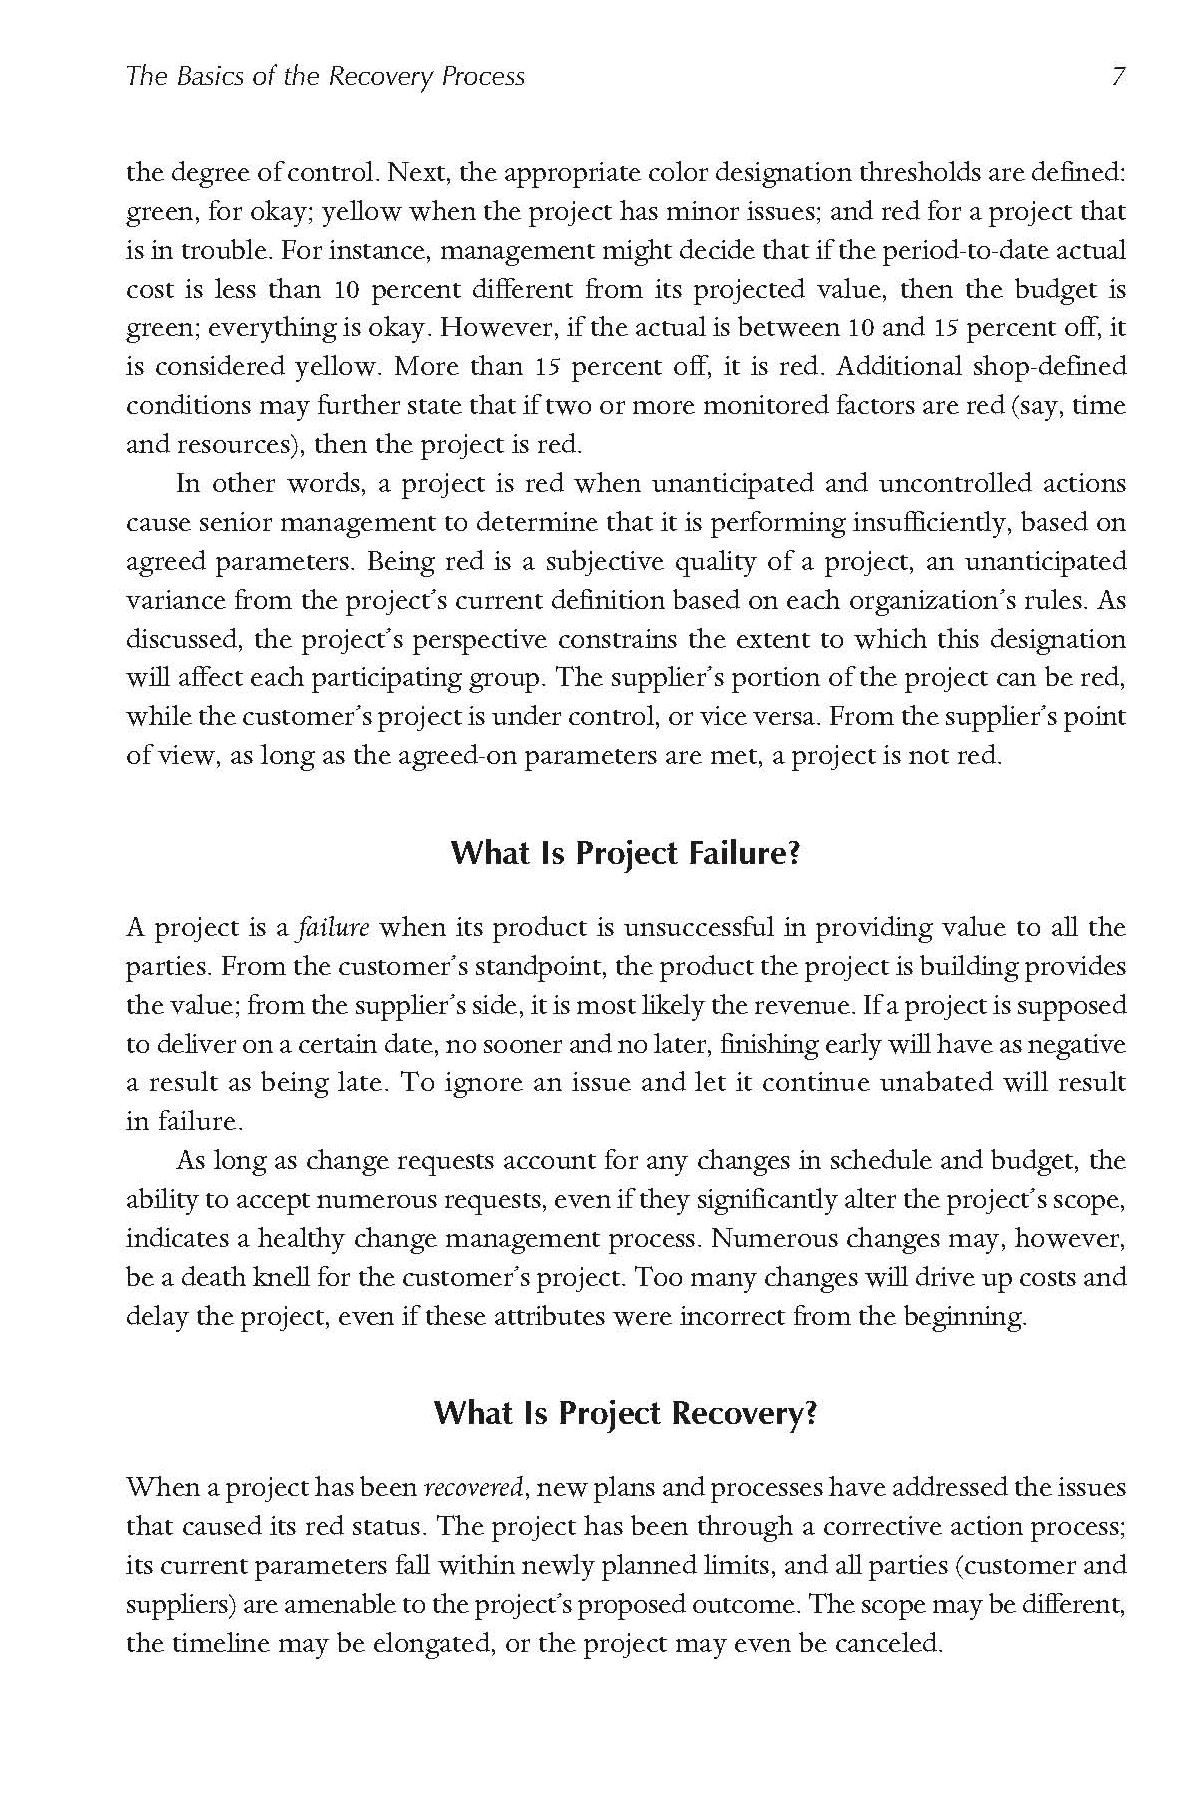 Rescue the Problem Project page 7